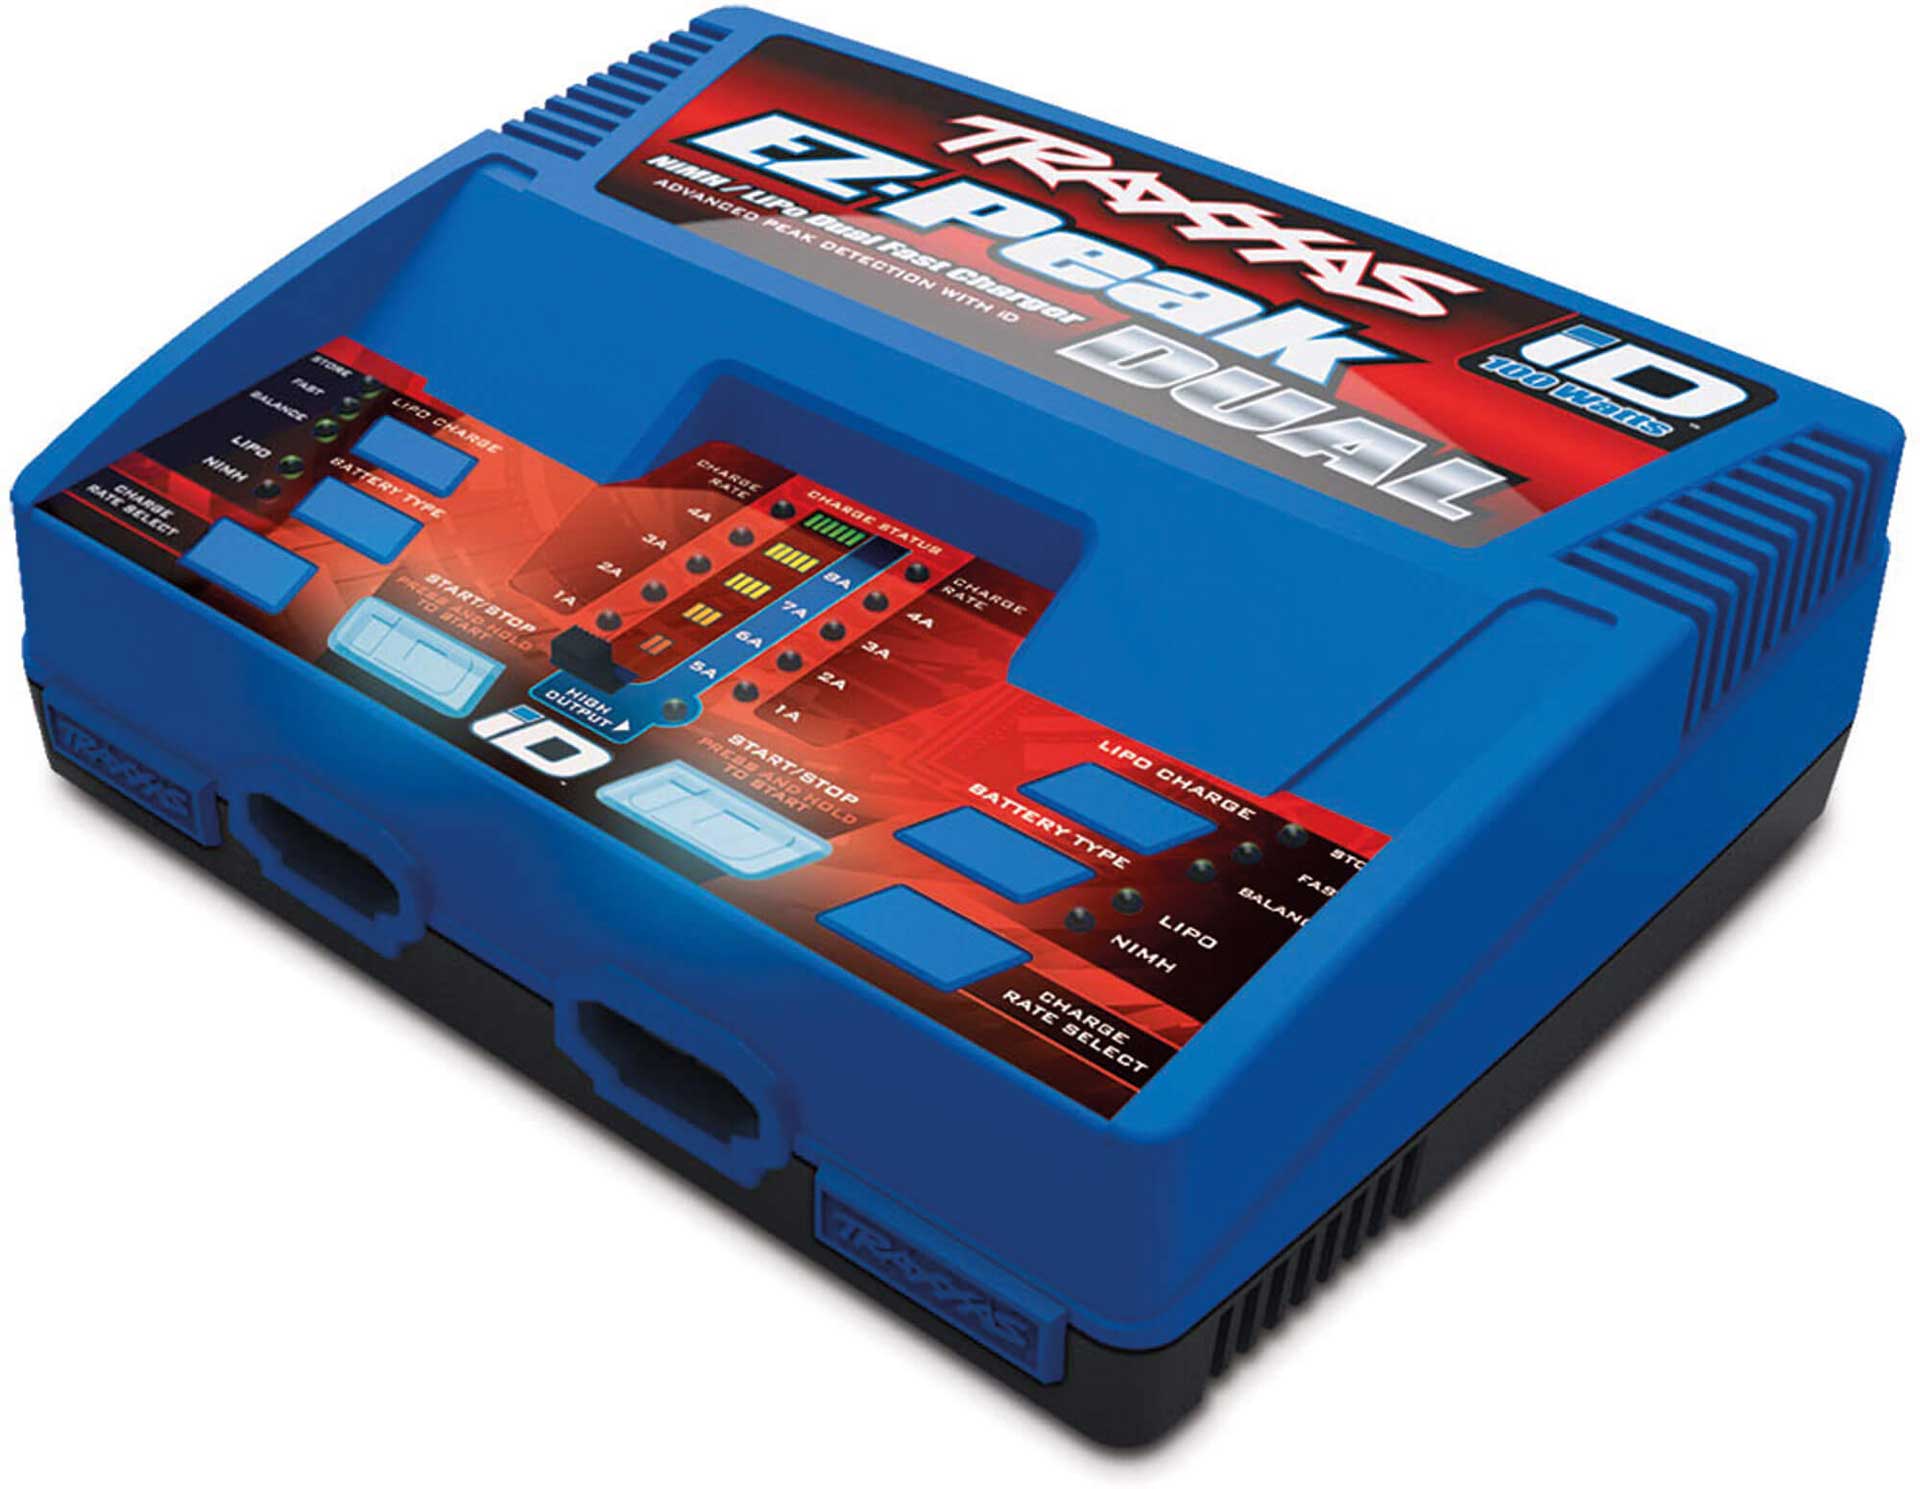 TRAXXAS DUAL EZ-PEAK PLUS 2X4 AMP NIMH/LIPO QUICK CHARGER WITH ID BATTERY DETECTION